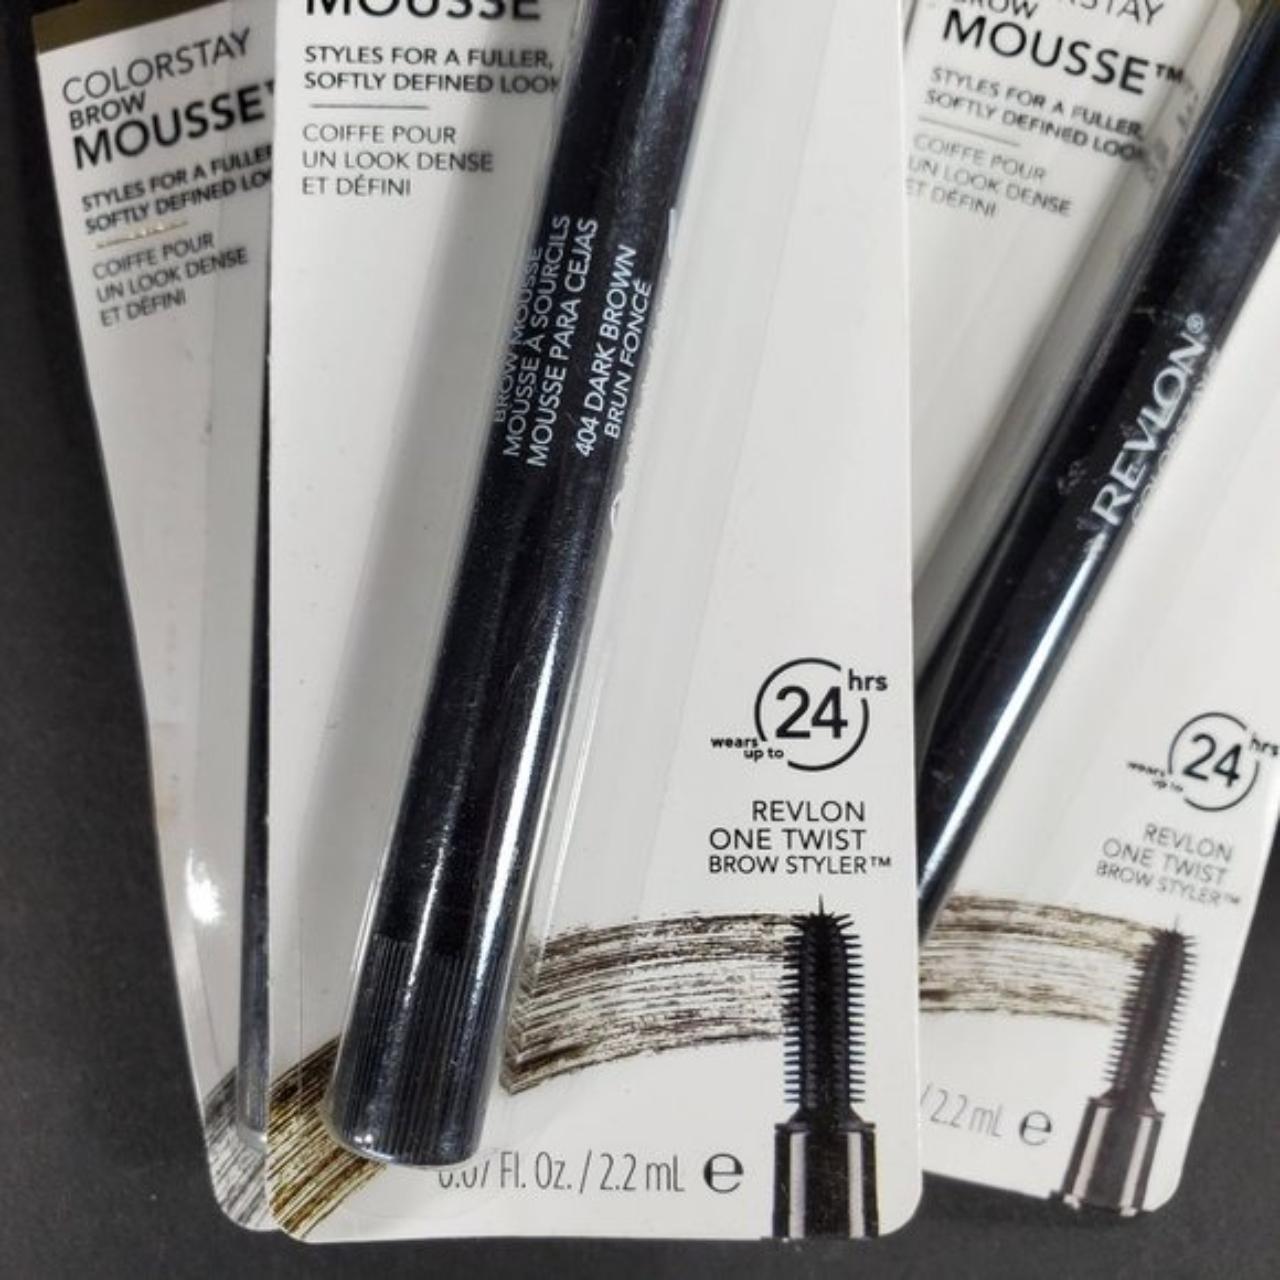 Product Image 4 - Revlon Color Stay Brow Mousse